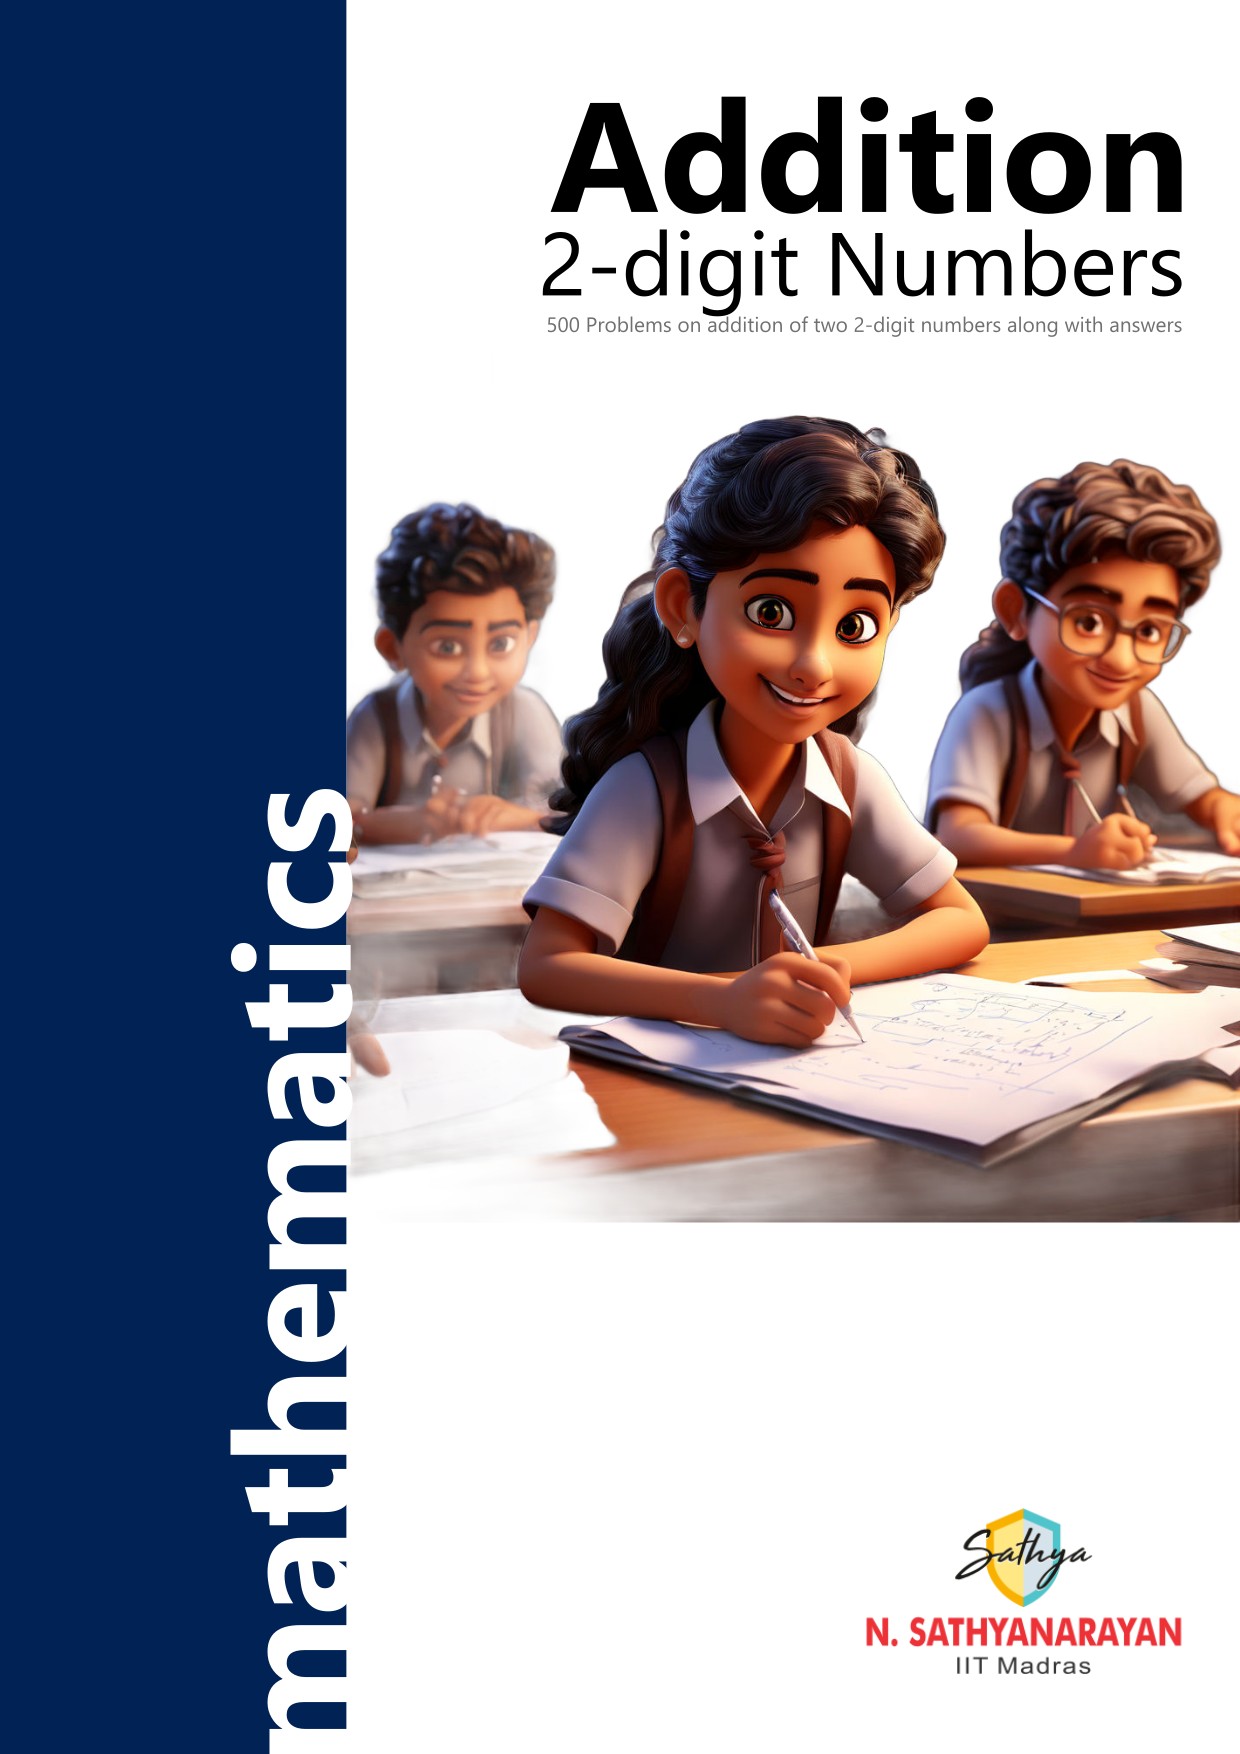 Addition of 2-digit numbers